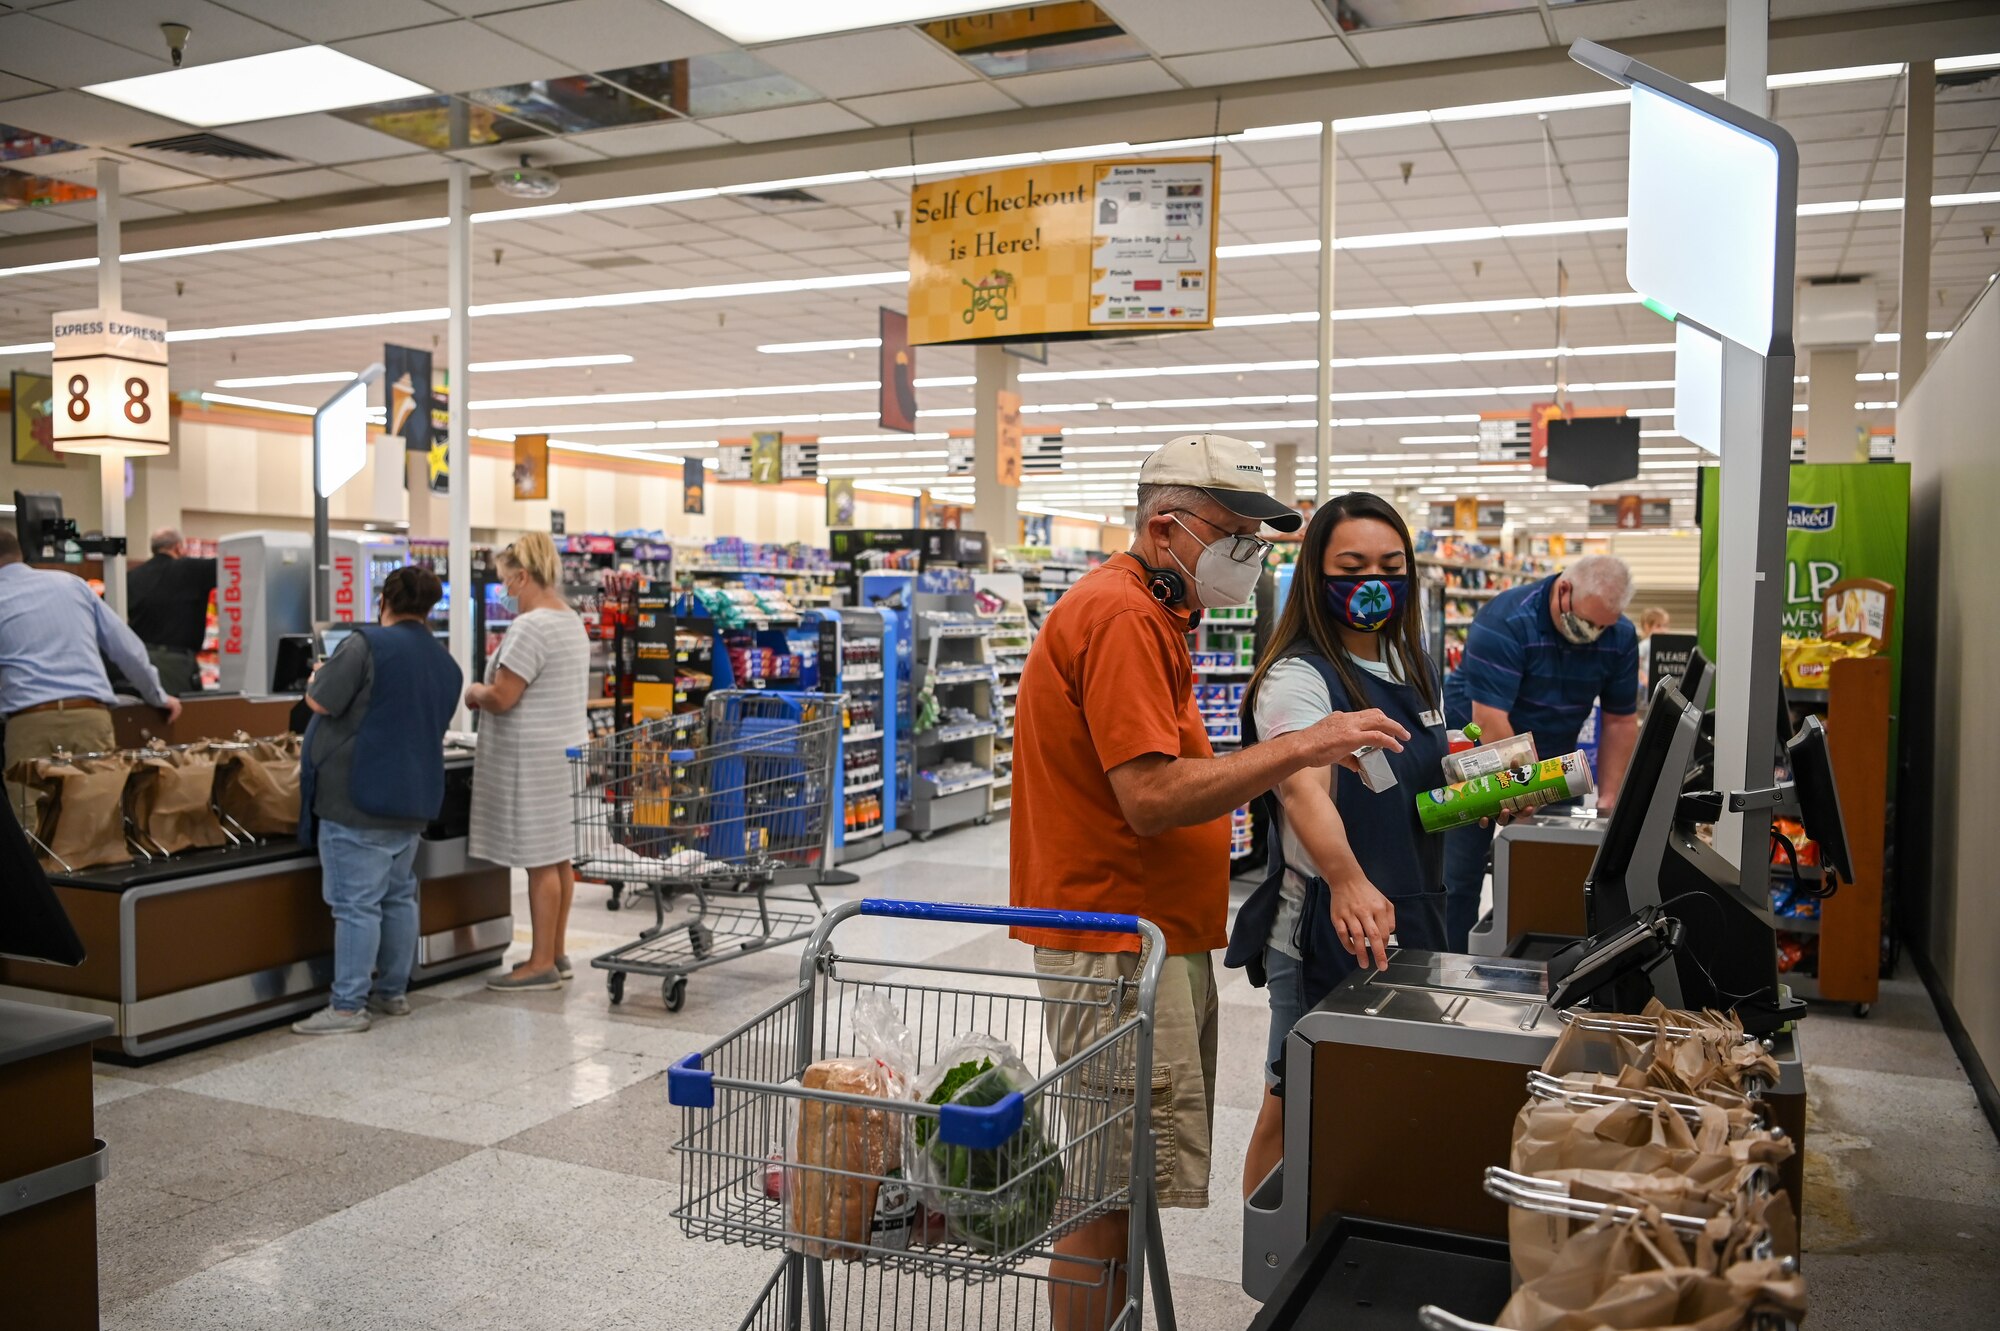 Commissary customers check out at newly installed registers Aug. 18, 2021, at Hill Air Force Base, Utah. Seven regular registers, one express checkout, and four self-checkout stations were installed and give customers a better checkout experience. (U.S. Air Force photo by Cynthia Griggs)